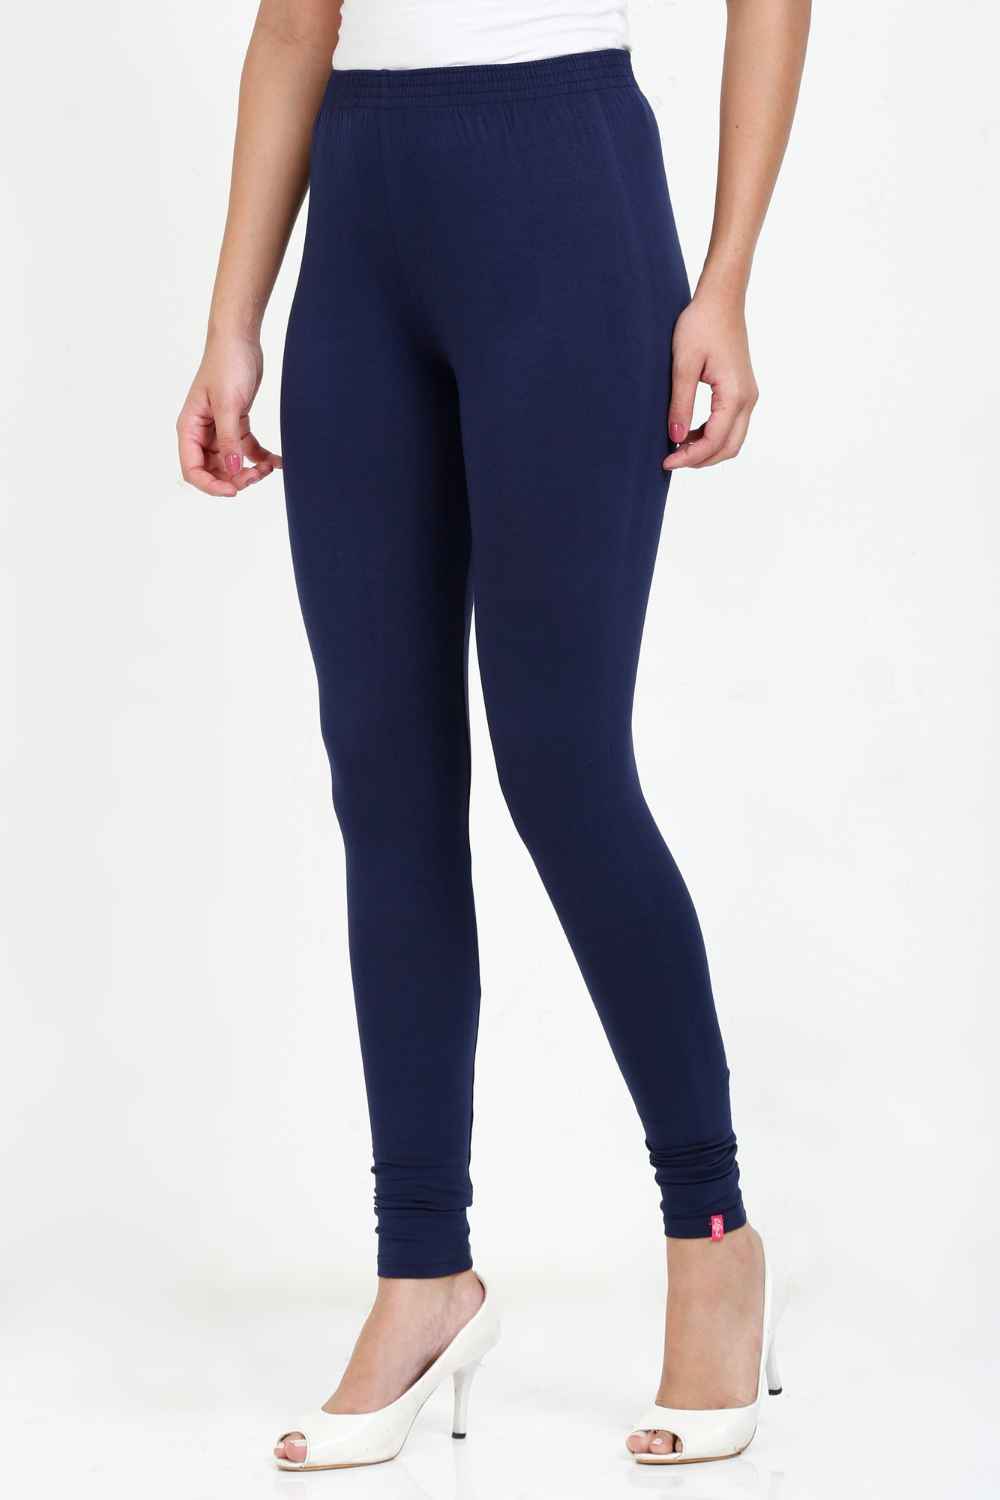 Rupa Softline Ankle Length Leggings for Women Cotton Elastane Ultra Soft  Free Size Stretch Fit All Day Comfort True Blue : Amazon.in: Fashion